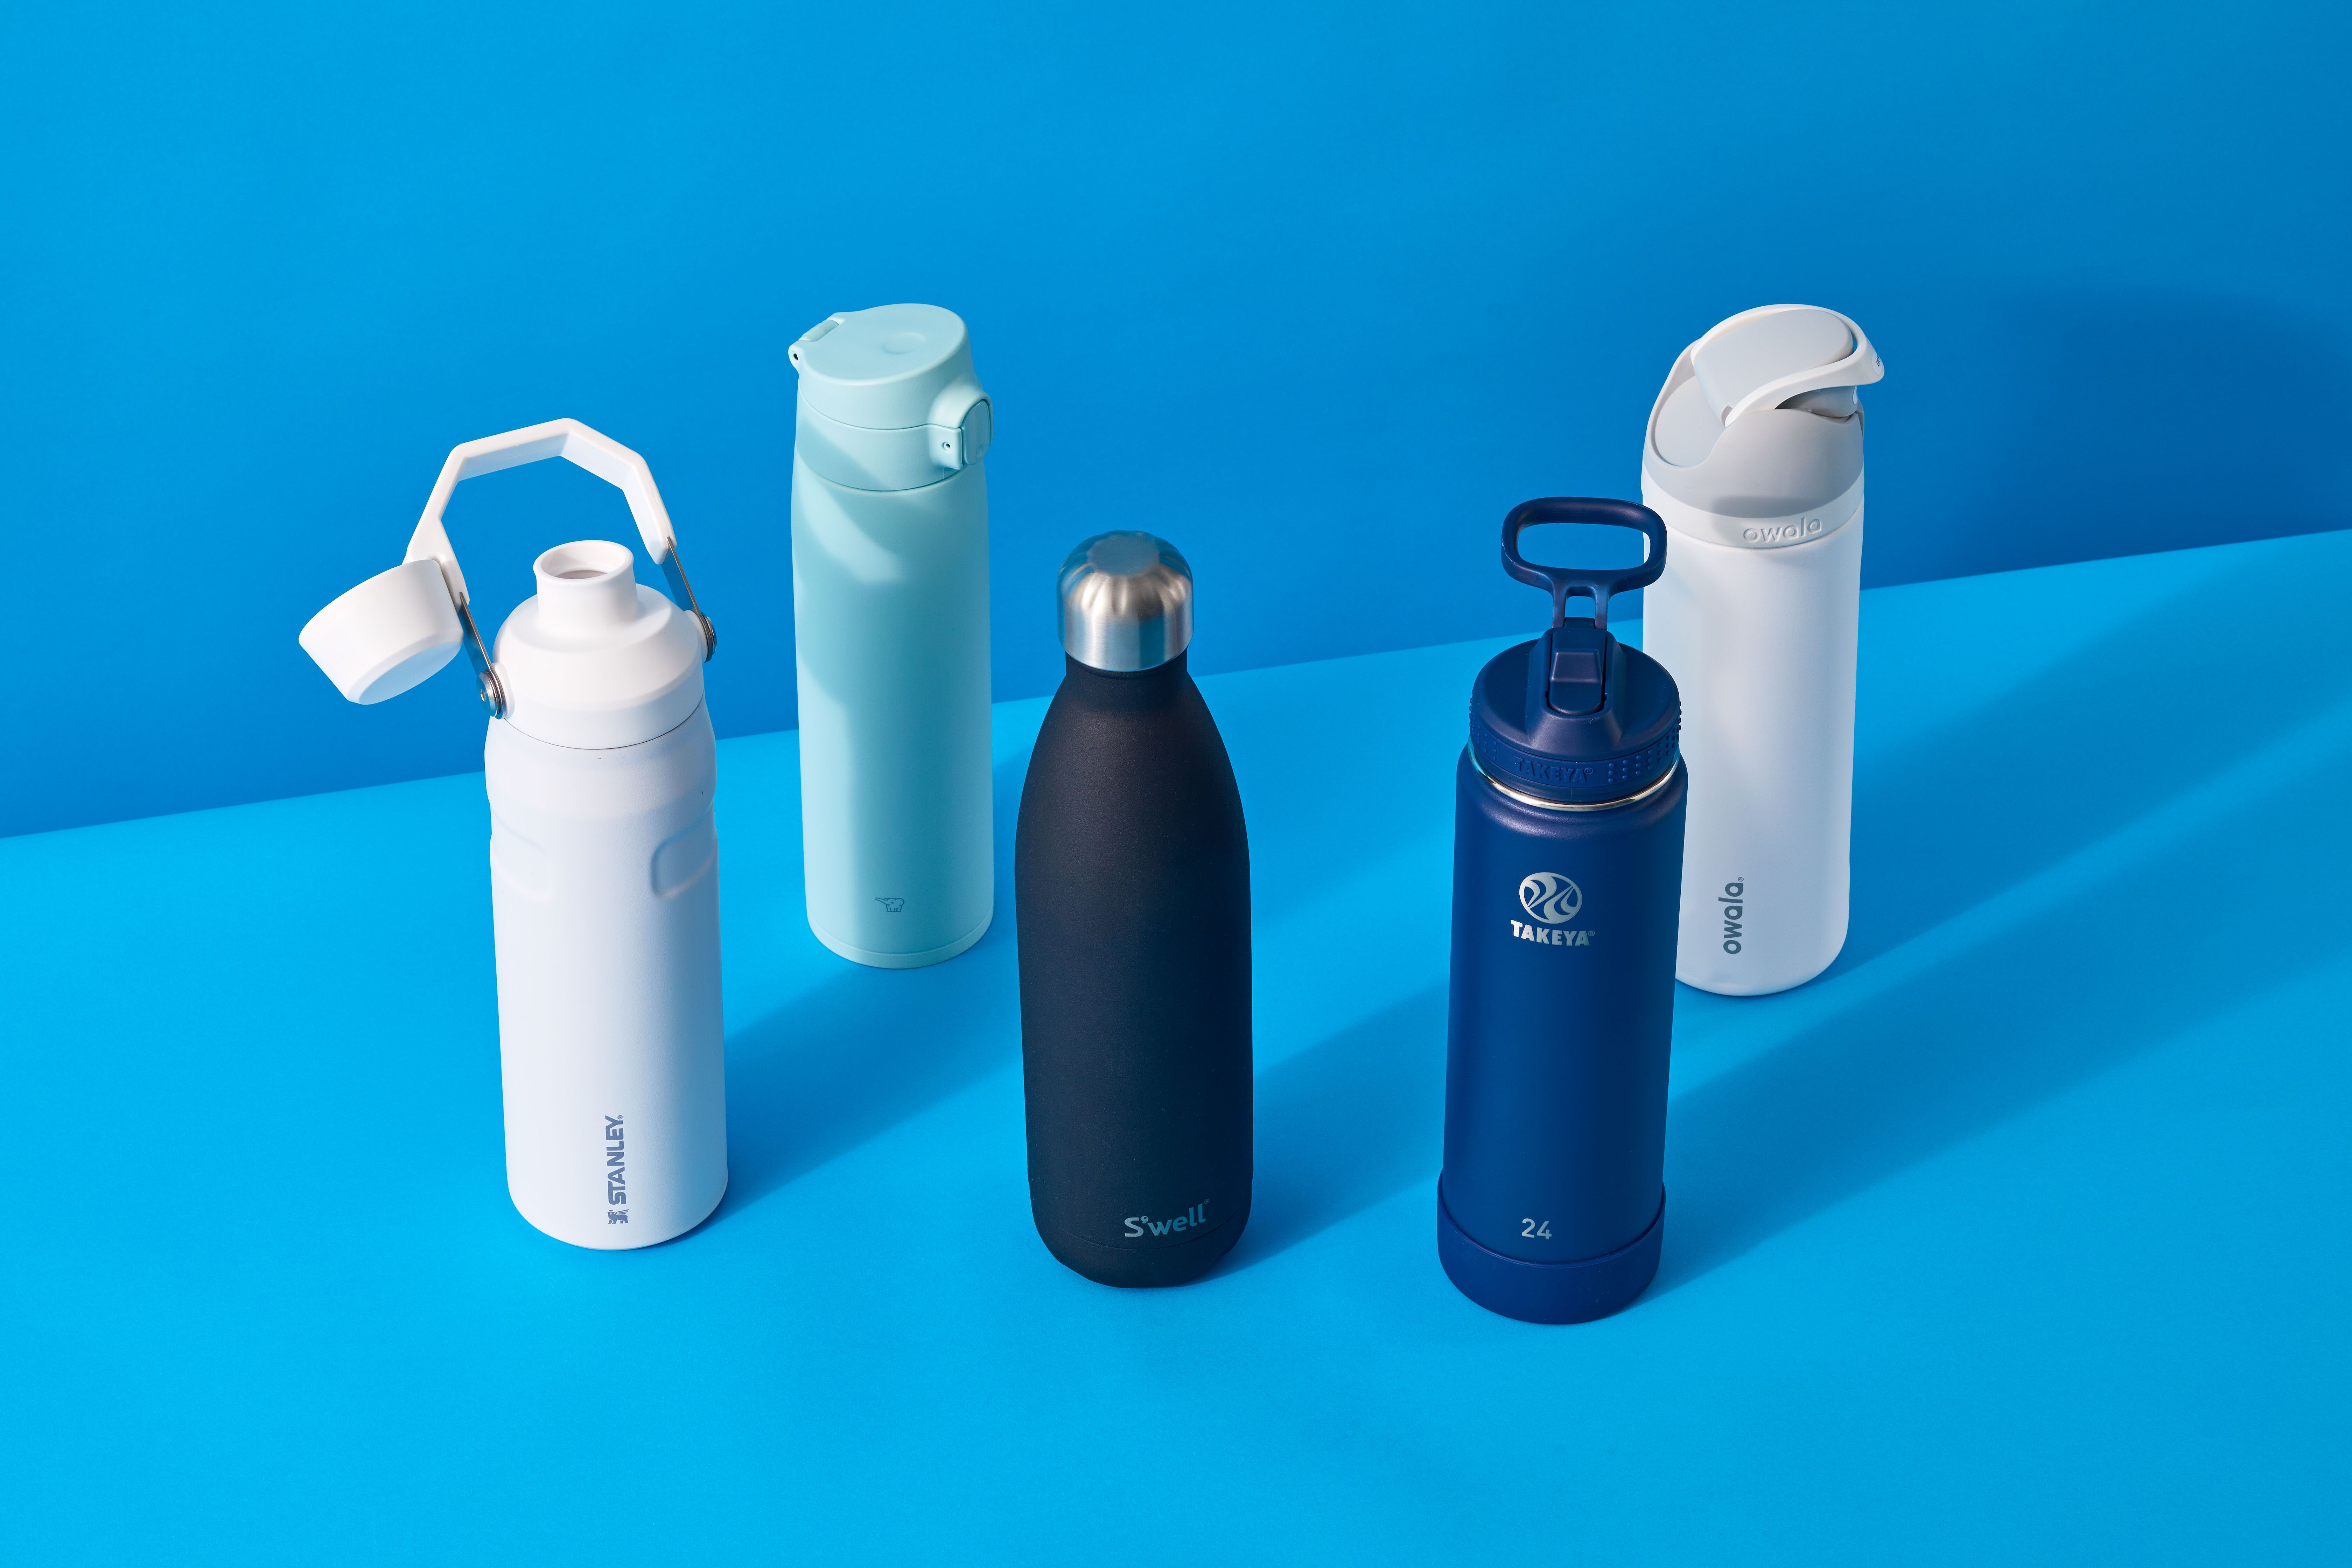 Owala or Takeya: Which water bottle wins? - Reviewed